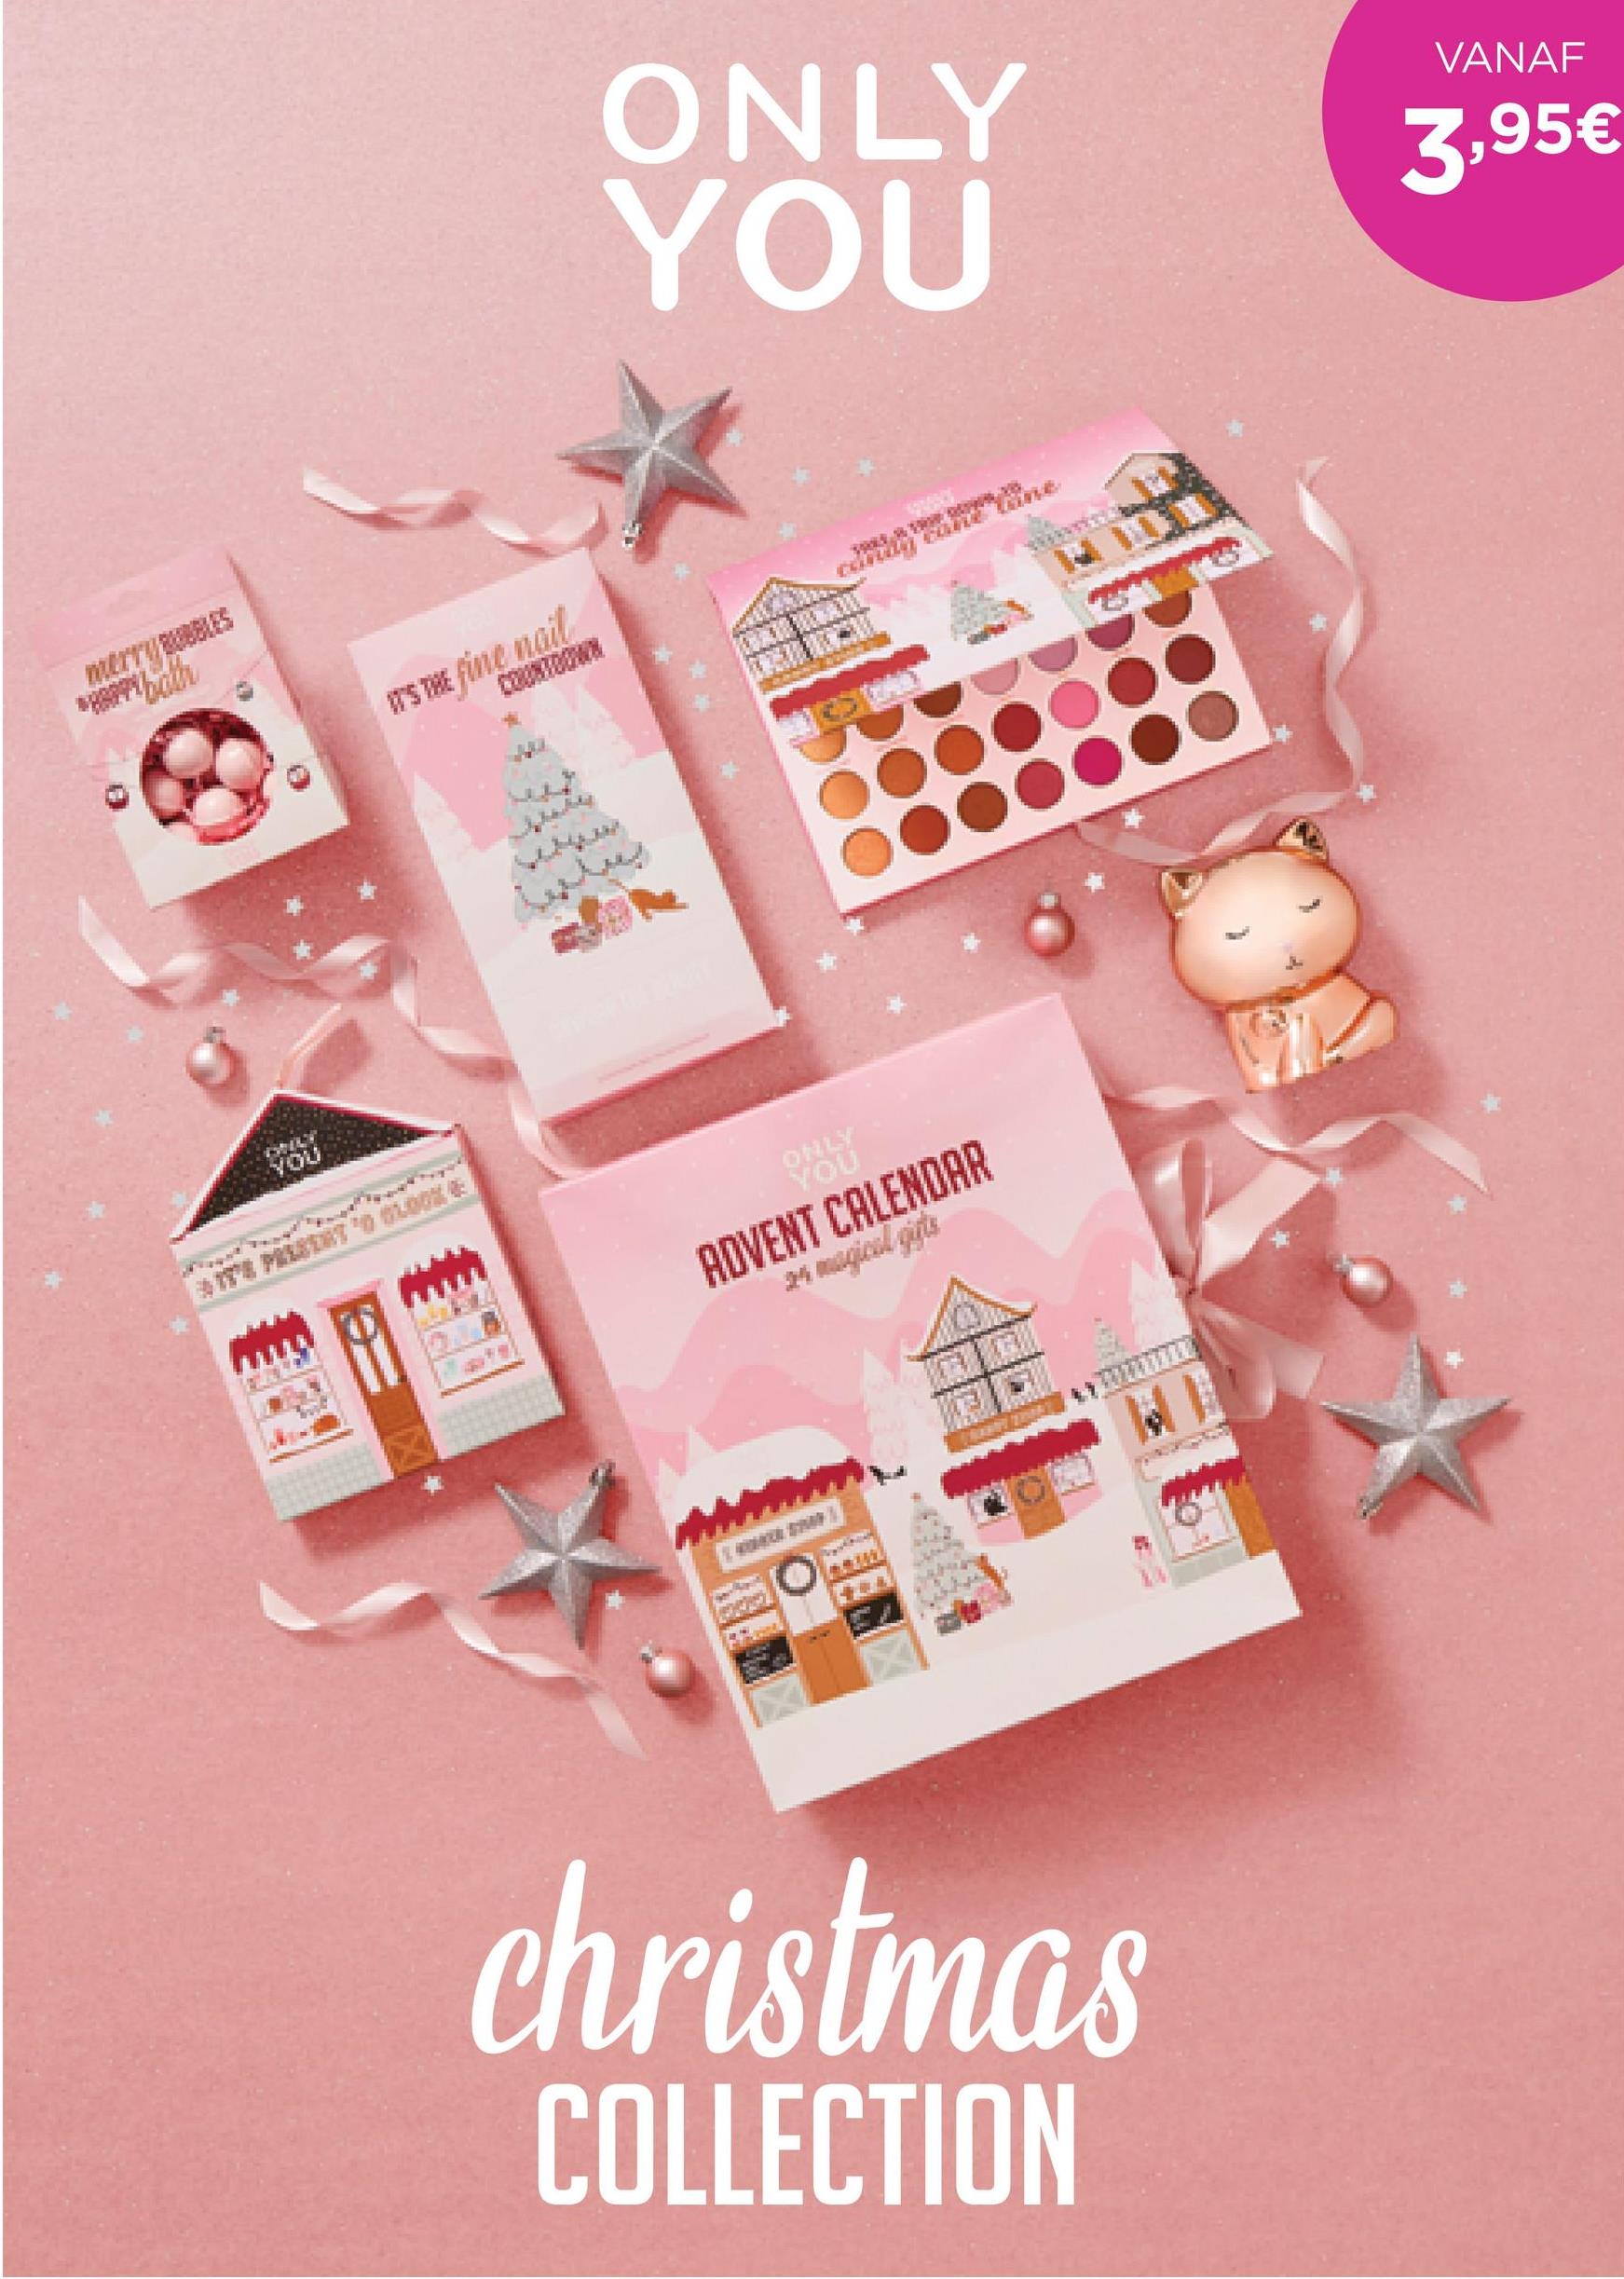 bath
GHILT
YOU
IT'S THE fine nail
Jed
ONLY
YOU
ONLY
ADVENT CALENDAR
24 magical gifts
WW
th
christmas
COLLECTION
2
VANAF
3,95€